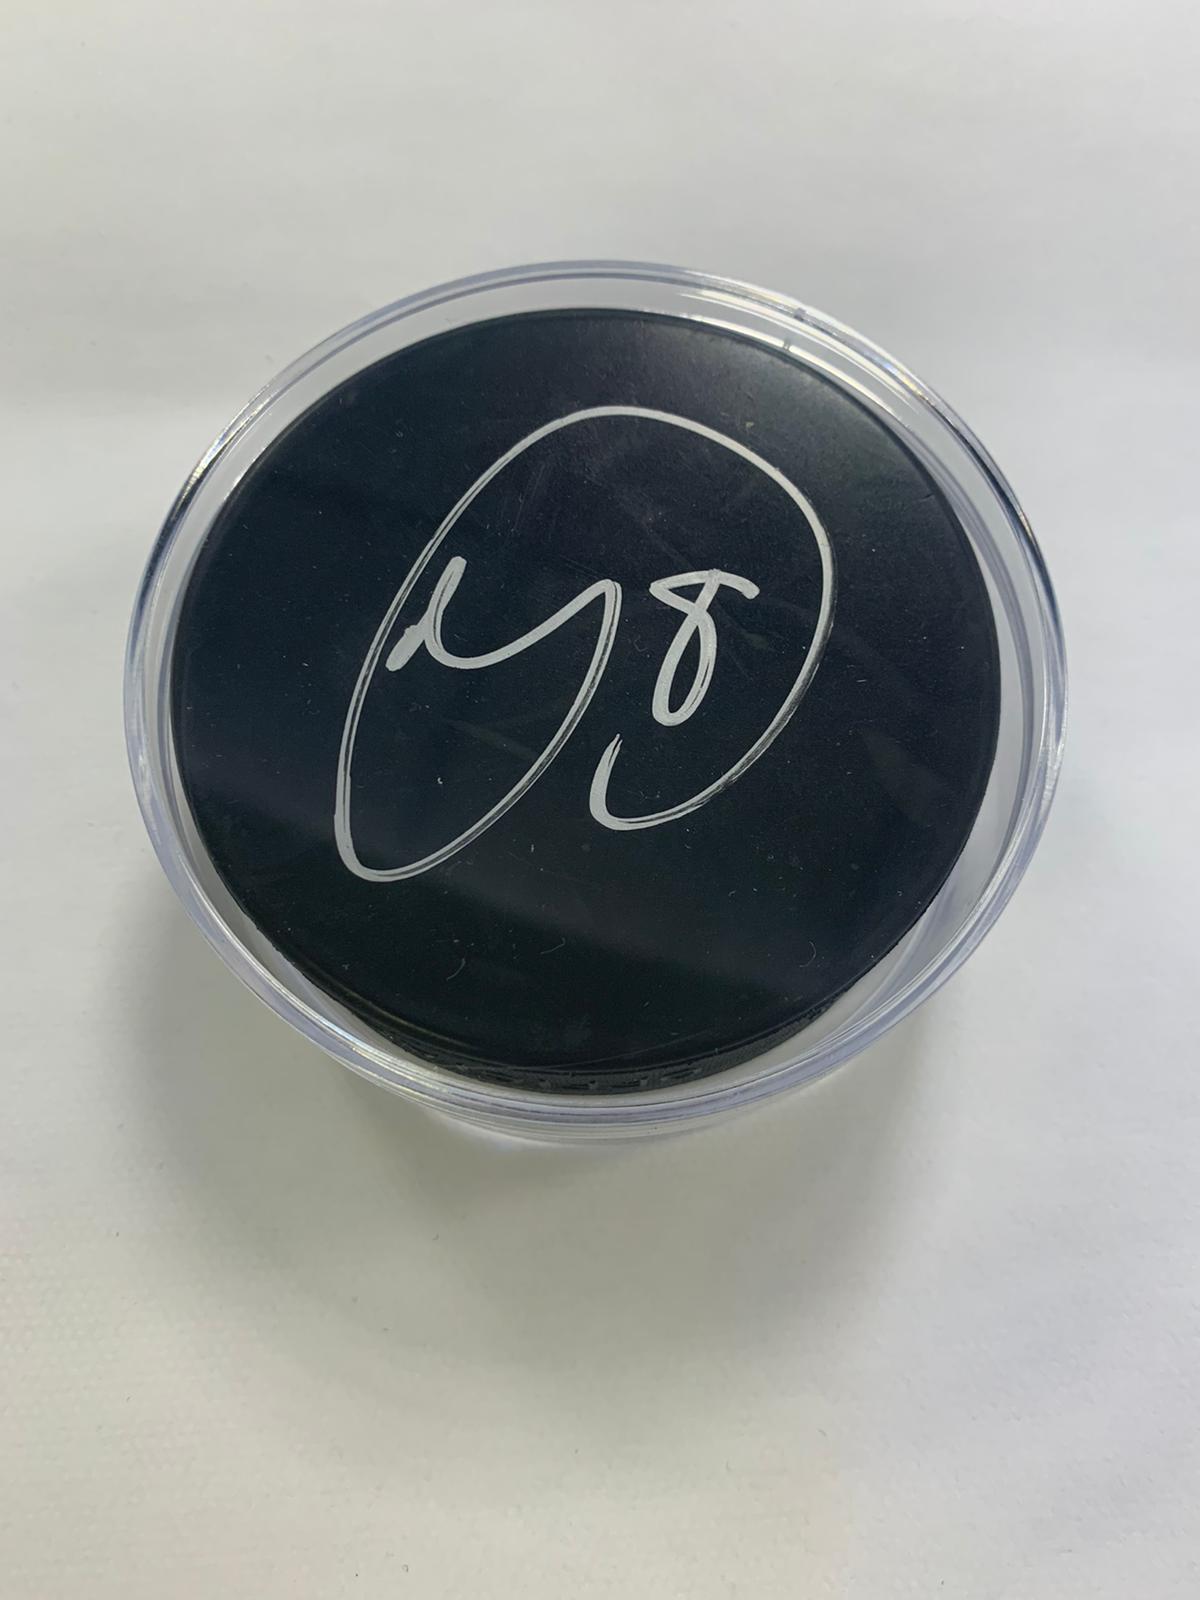 Ice Hockey Puck Signed by GB International Matthew Myers with protective plastic case